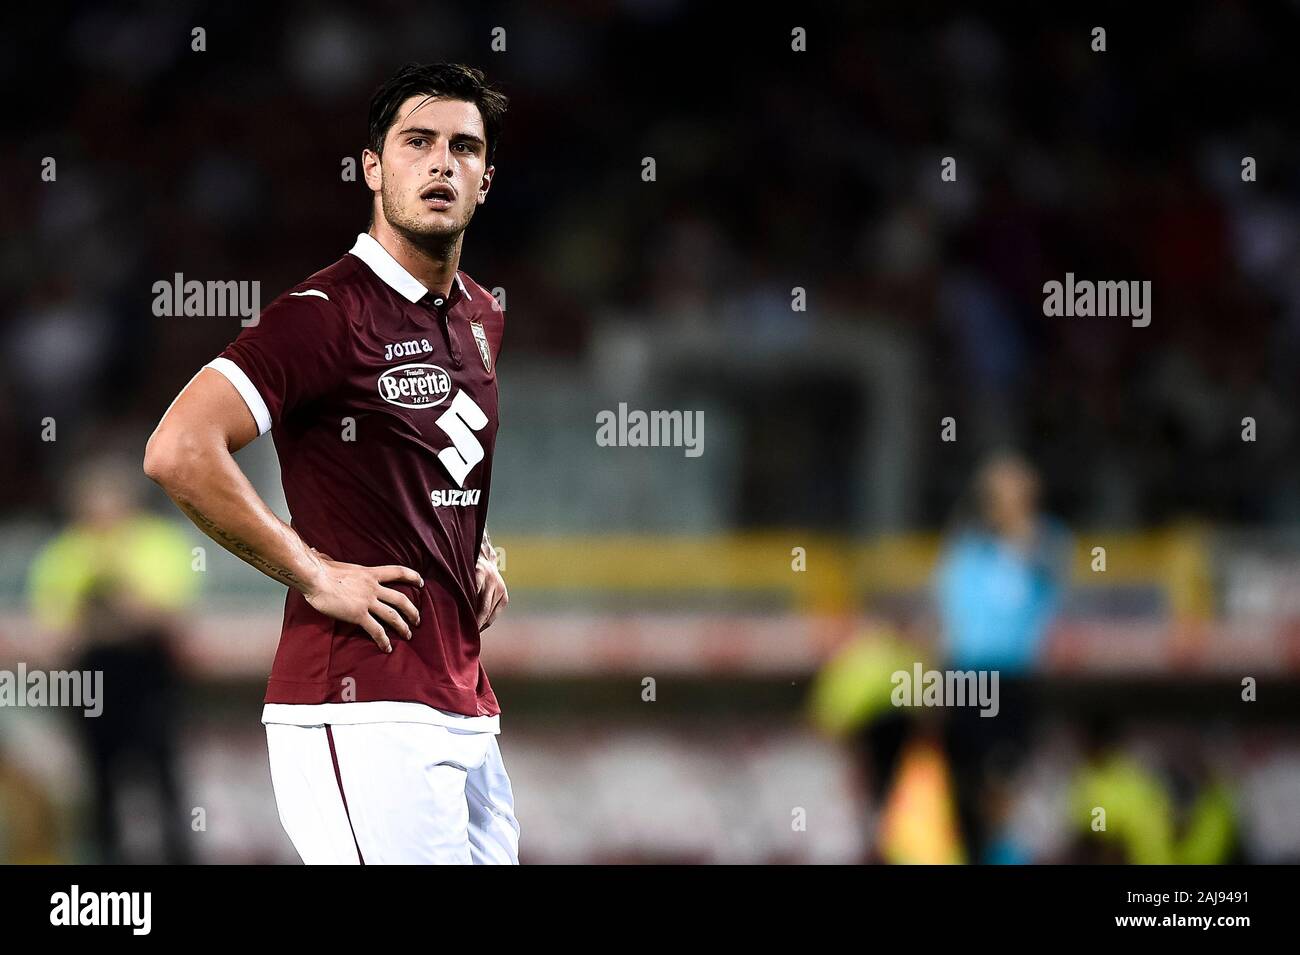 Turin, Italy. 8 August, 2019: Kevin Bonifazi of Torino FC looks on during the UEFA Europa League third qualifying round football match between Torino FC and FC Shakhtyor Soligorsk. Torino FC won 5-0 over FC Shakhtyor Soligorsk. Credit: Nicolò Campo/Alamy Live News Stock Photo